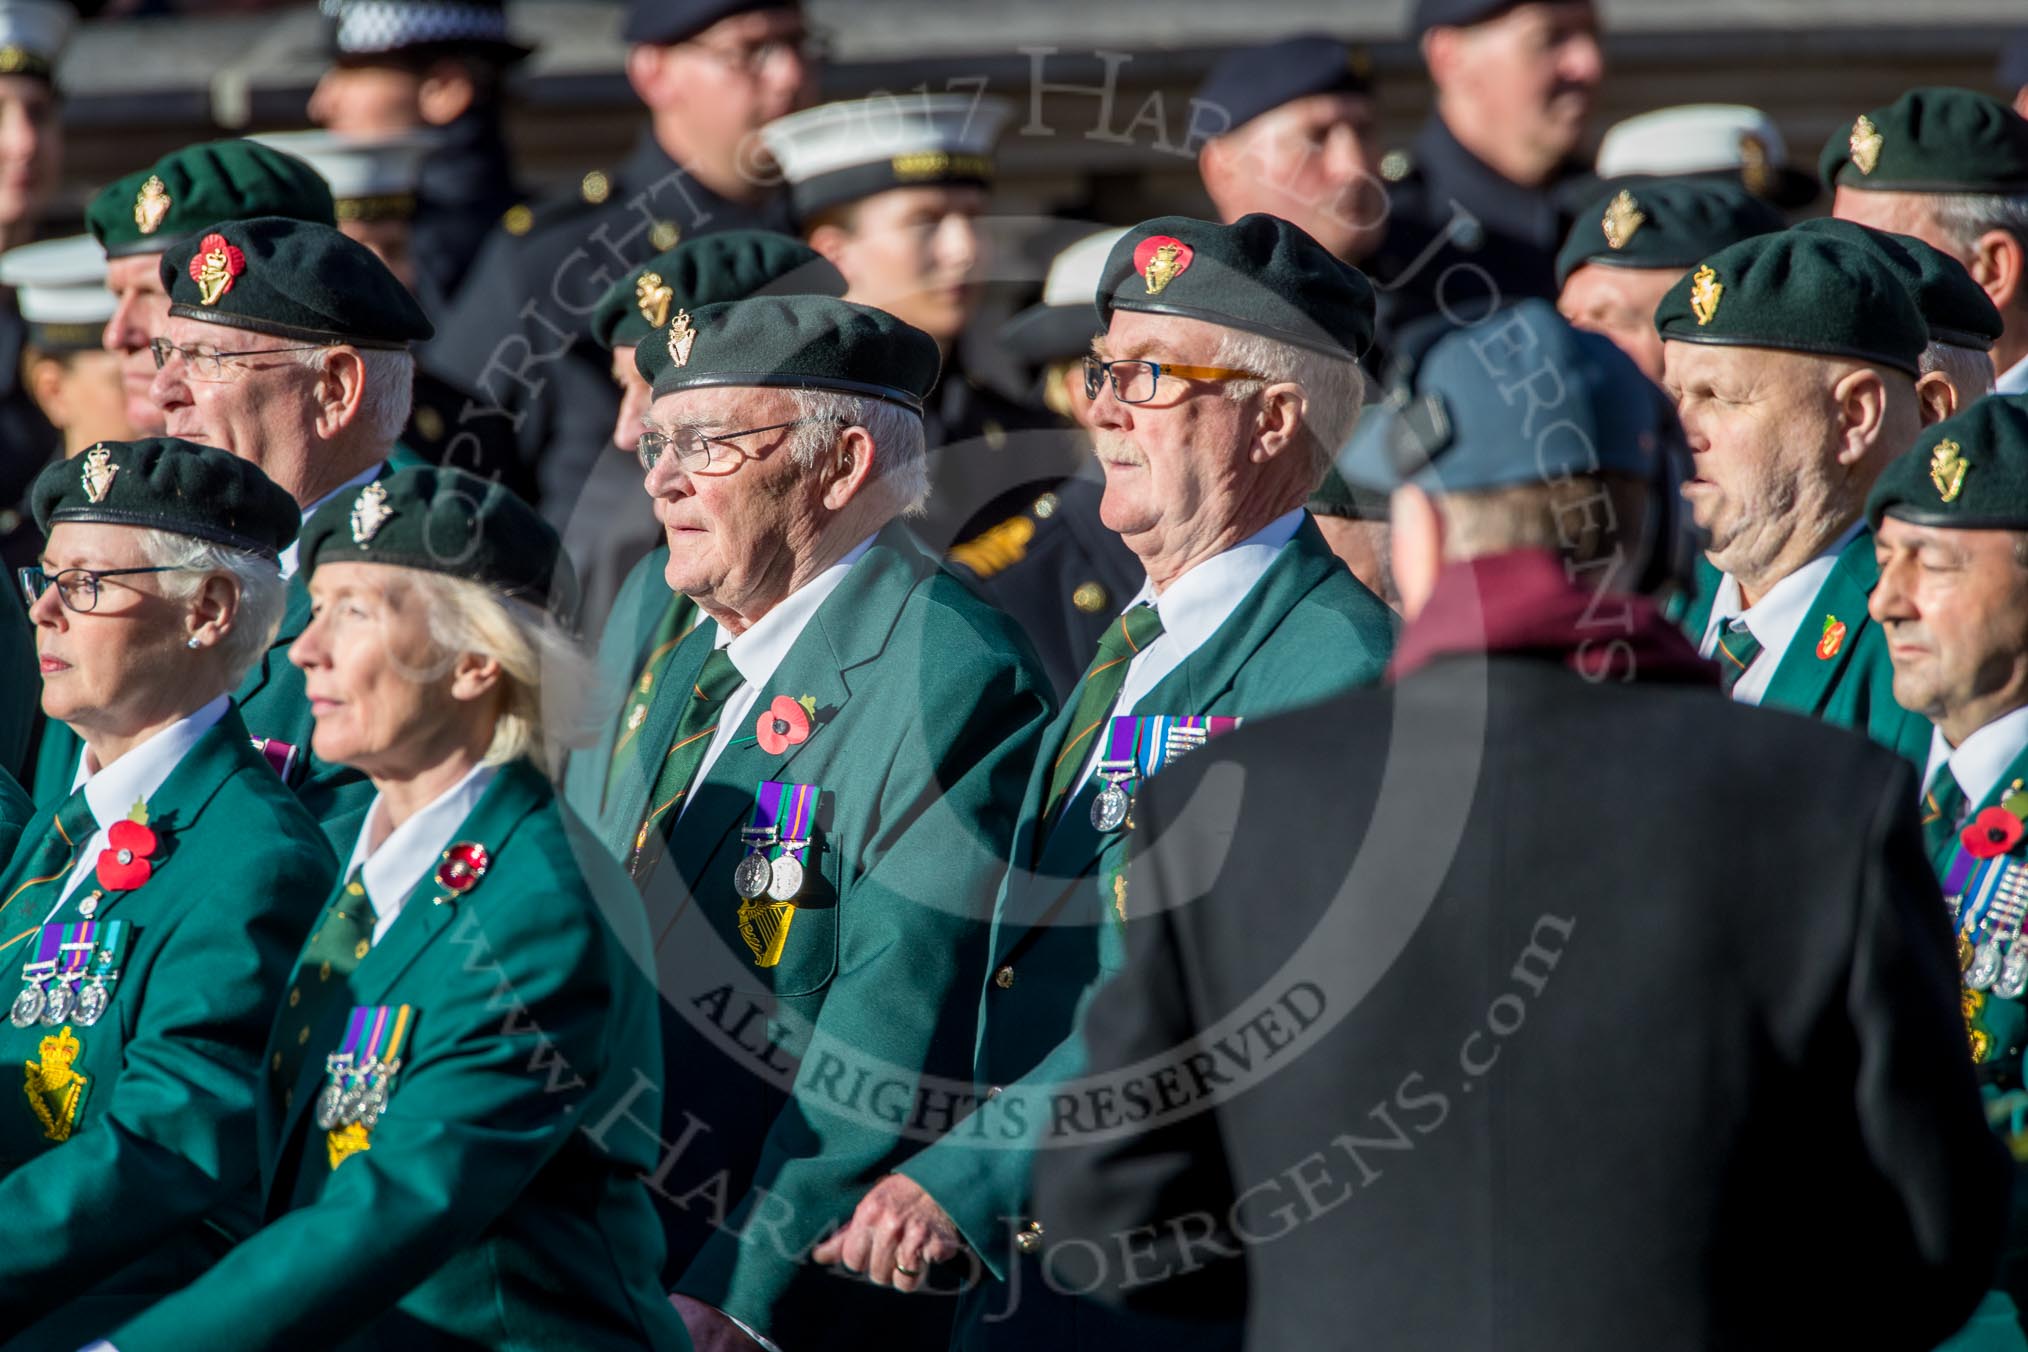 The Regimental Association of The Ulster Defence Regiment (Group A38, 83 members) during the Royal British Legion March Past on Remembrance Sunday at the Cenotaph, Whitehall, Westminster, London, 11 November 2018, 12:03.